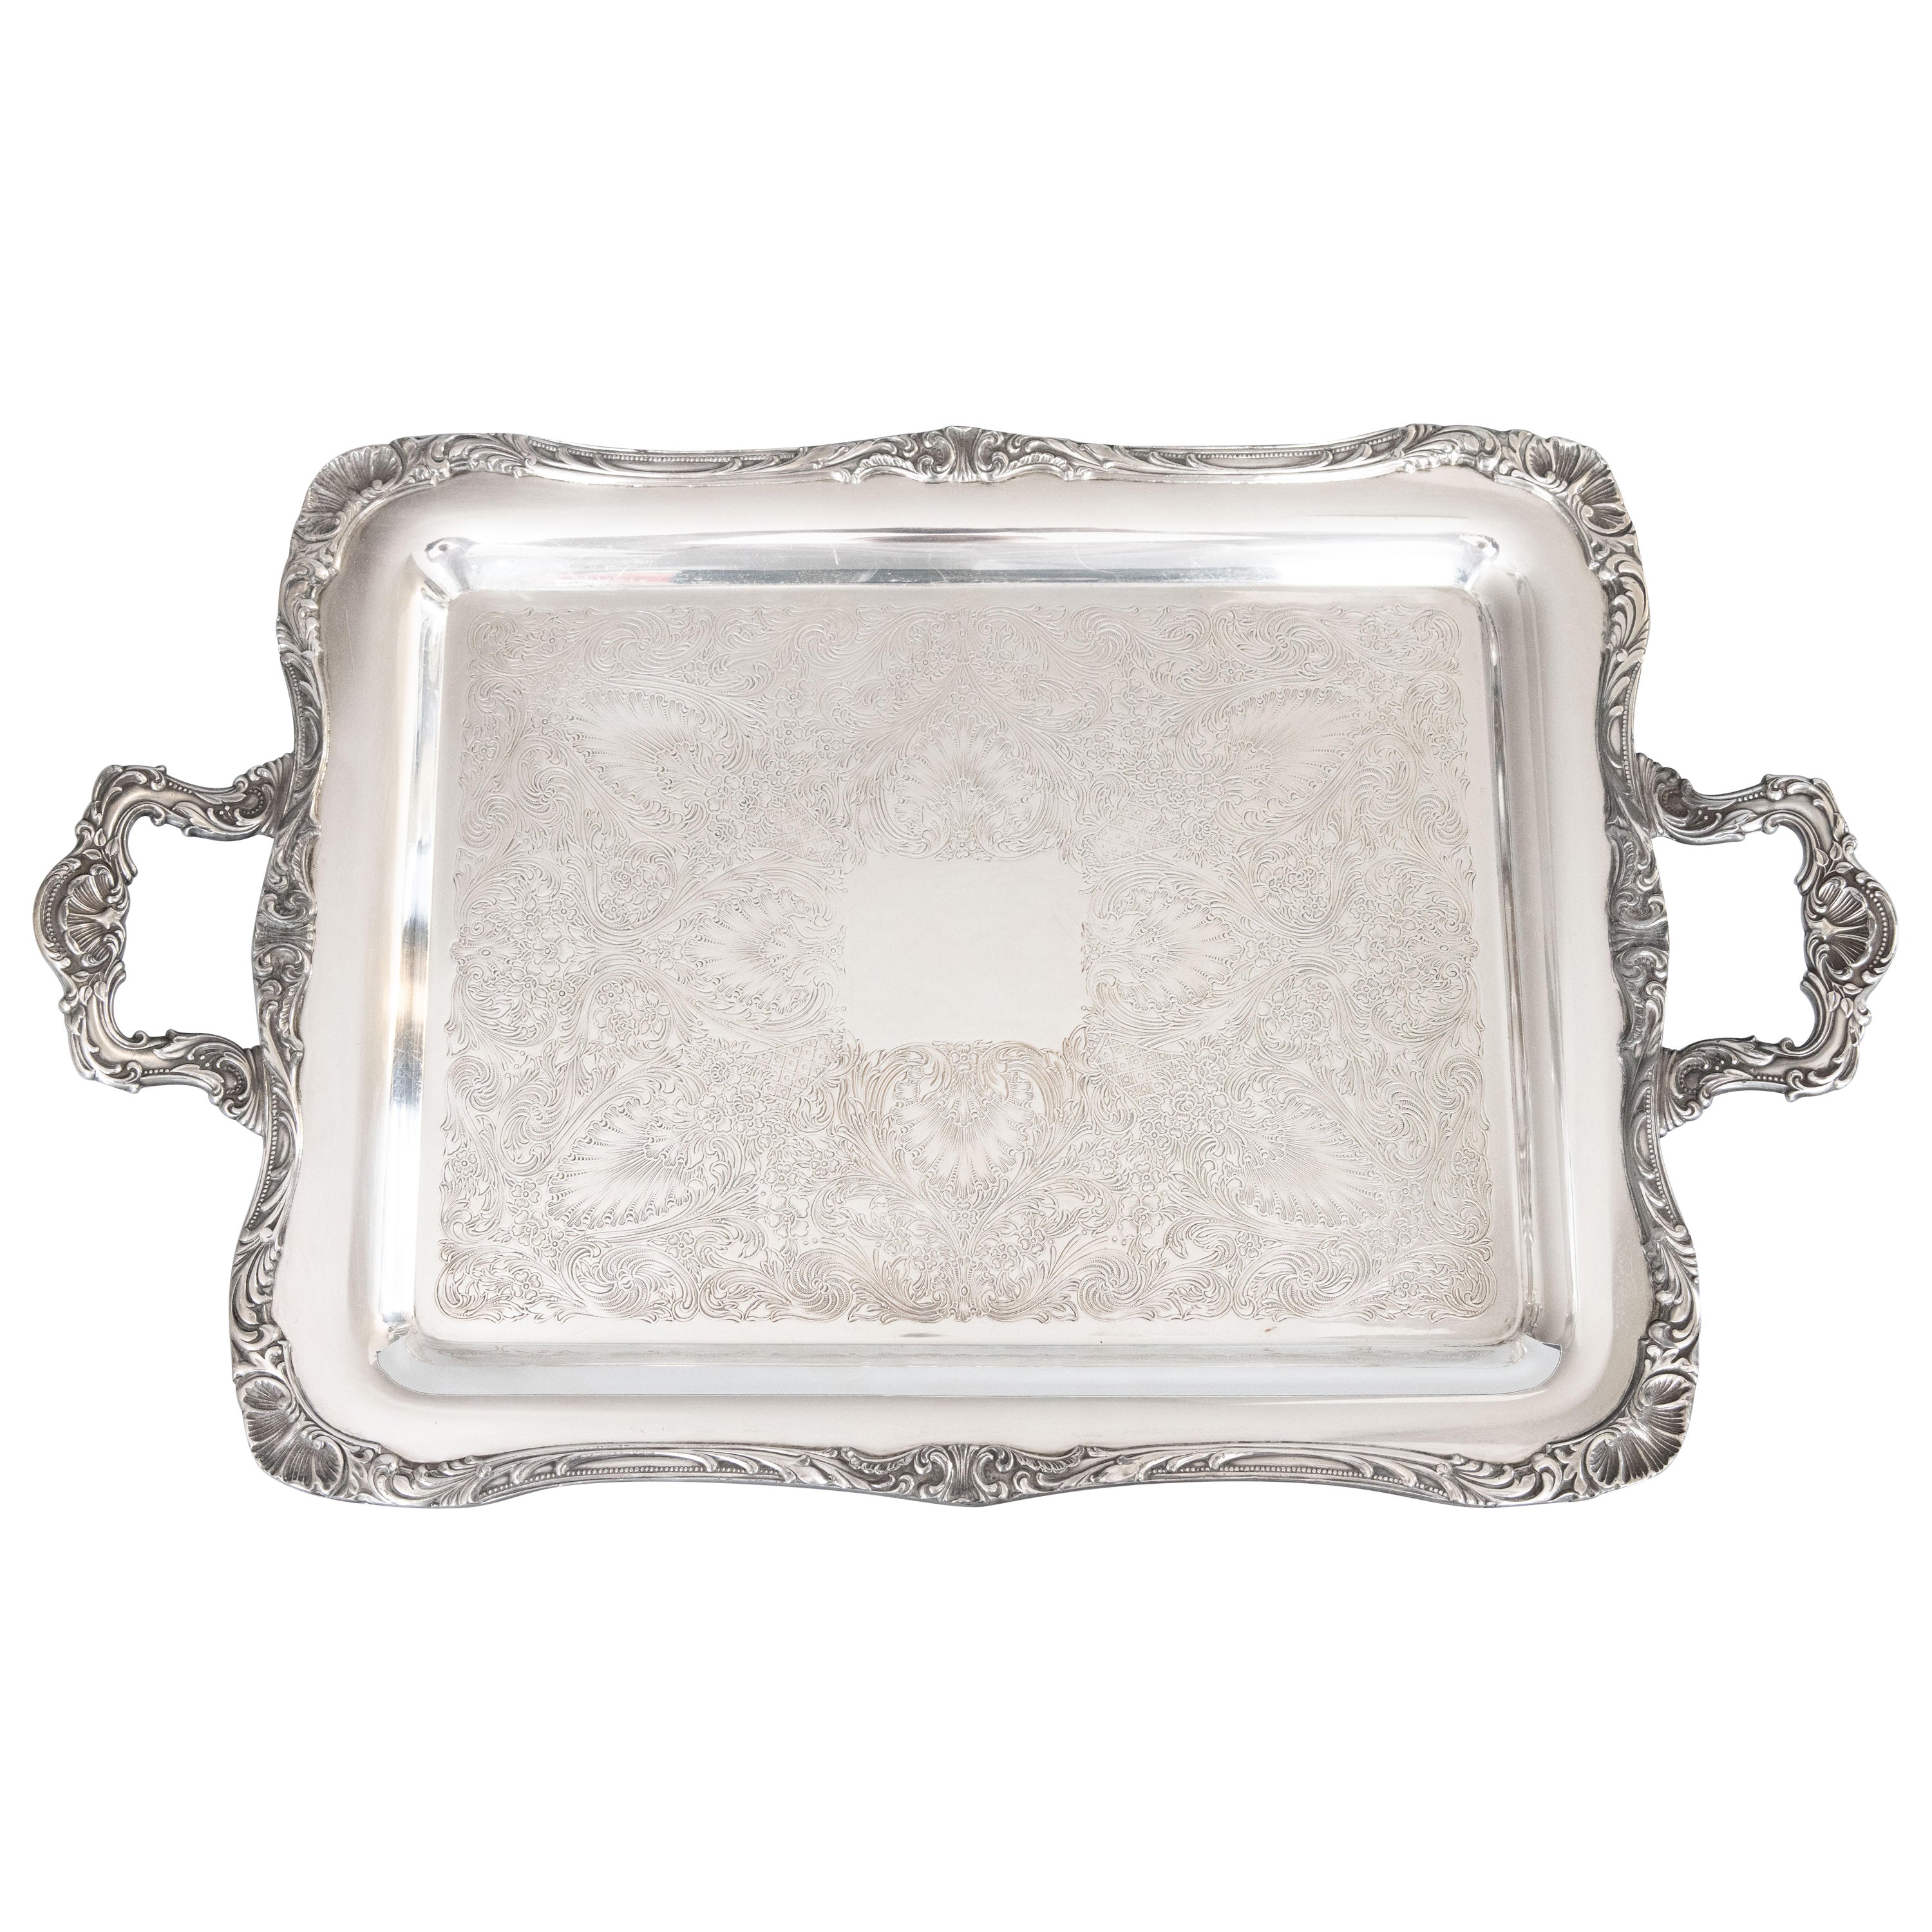 Wm Rogers Silver Plate Footed Rectangular Serving Tray With Handles, circa 1950 For Sale